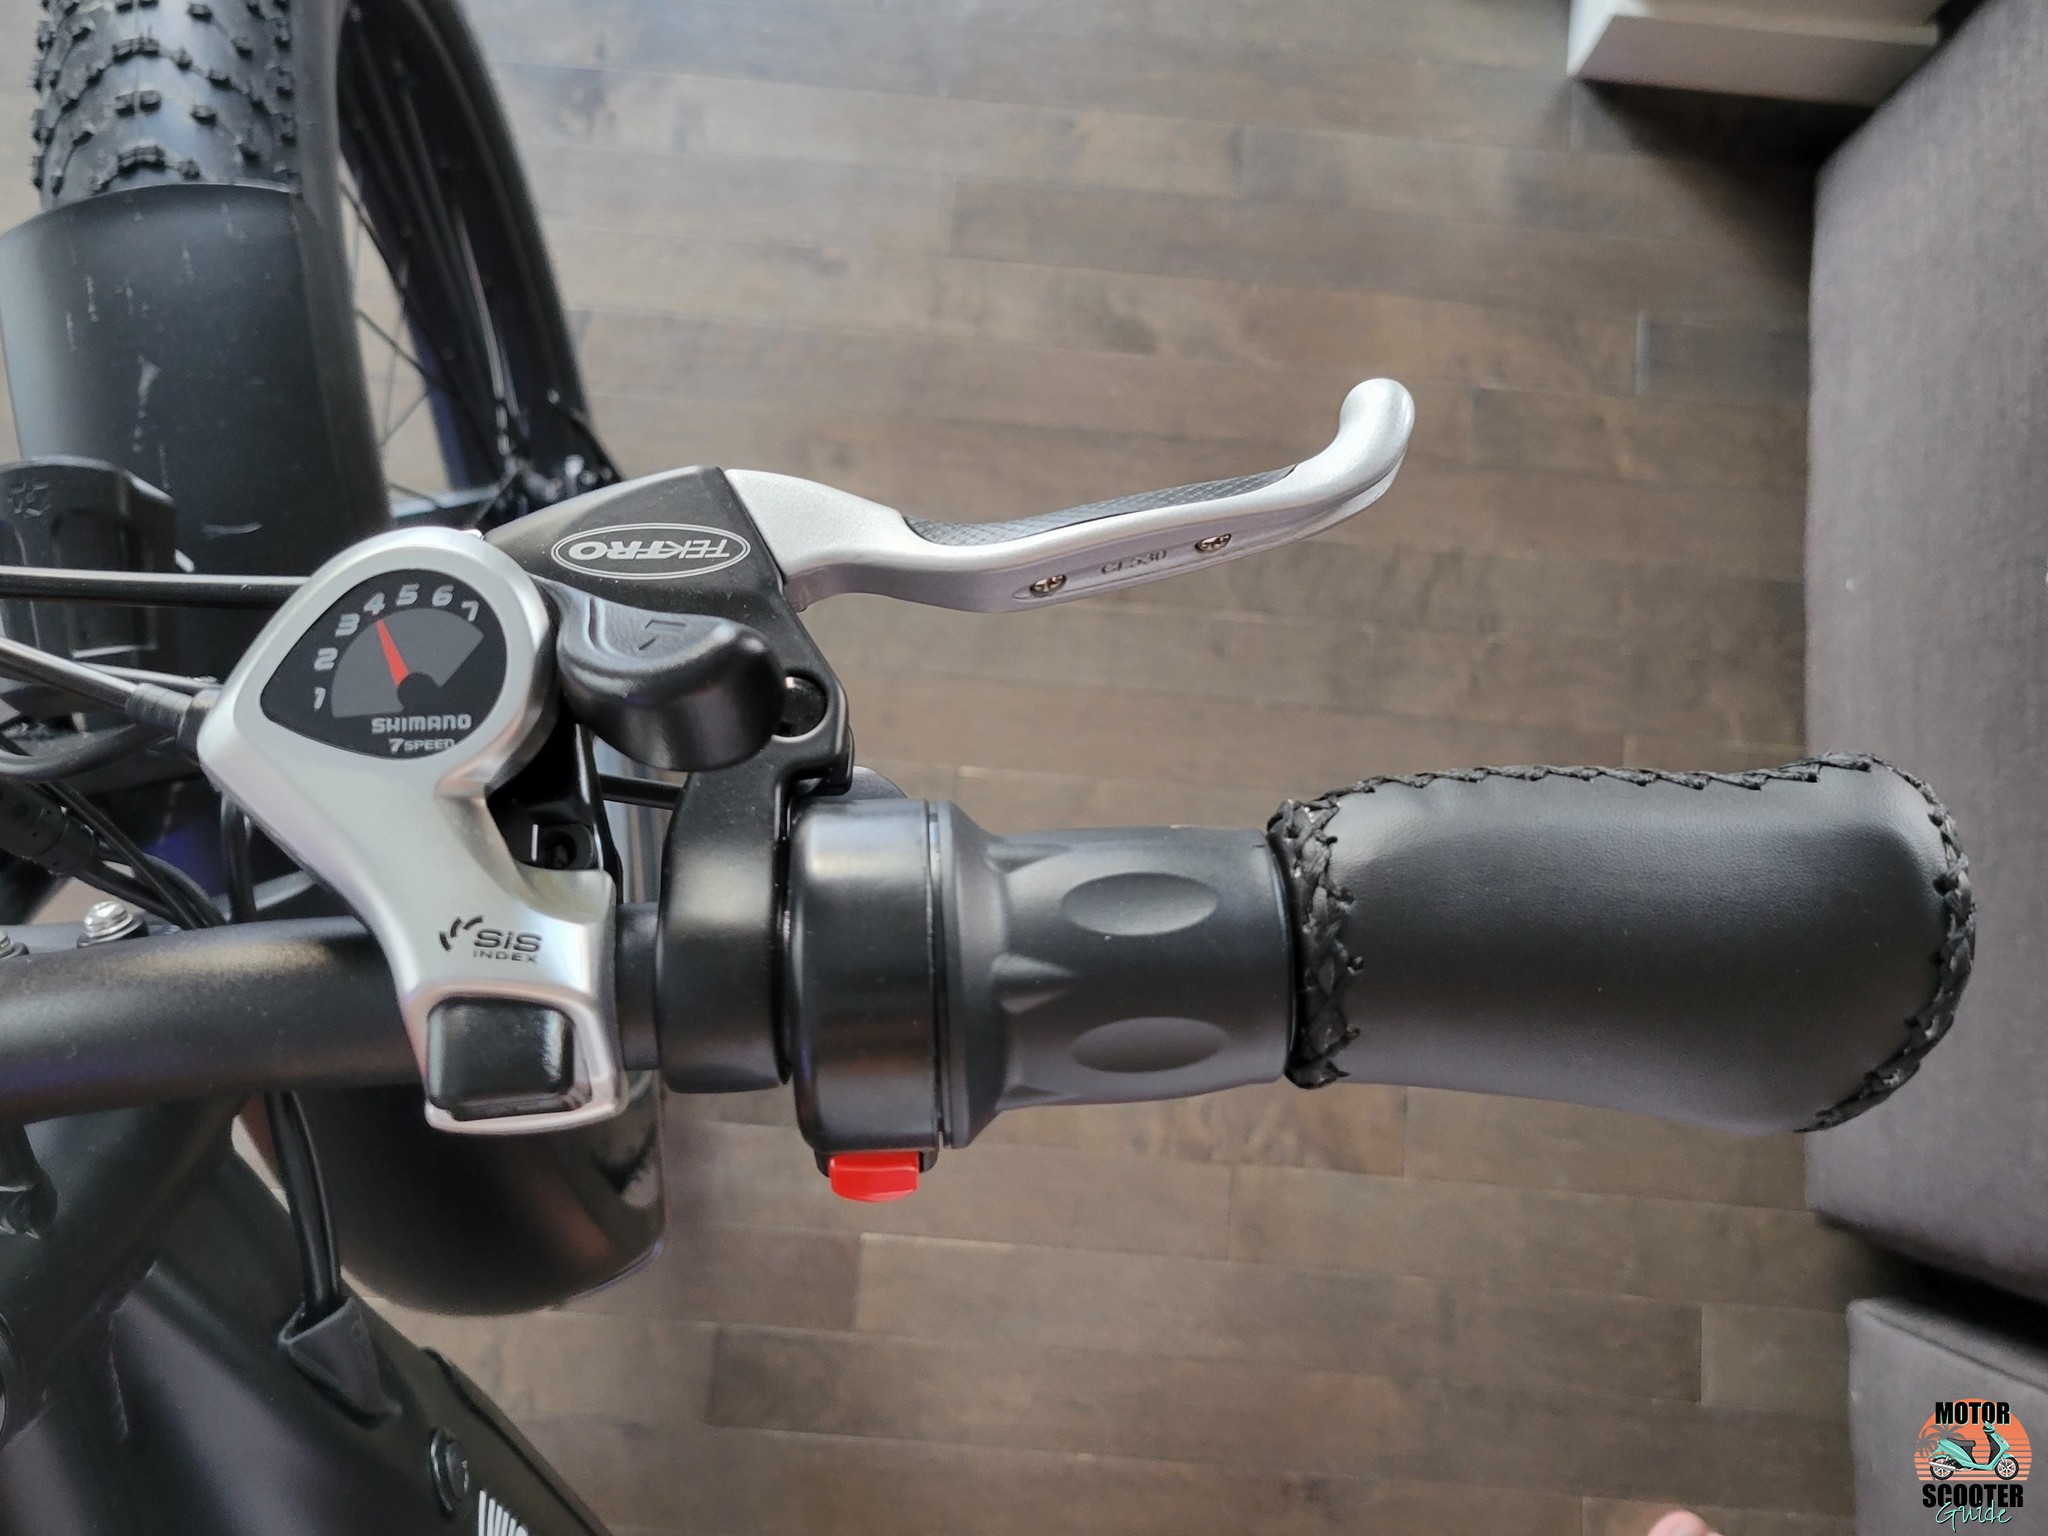 Closeup of the twist throttle and 7-speed shifter on the right side of the handlebar